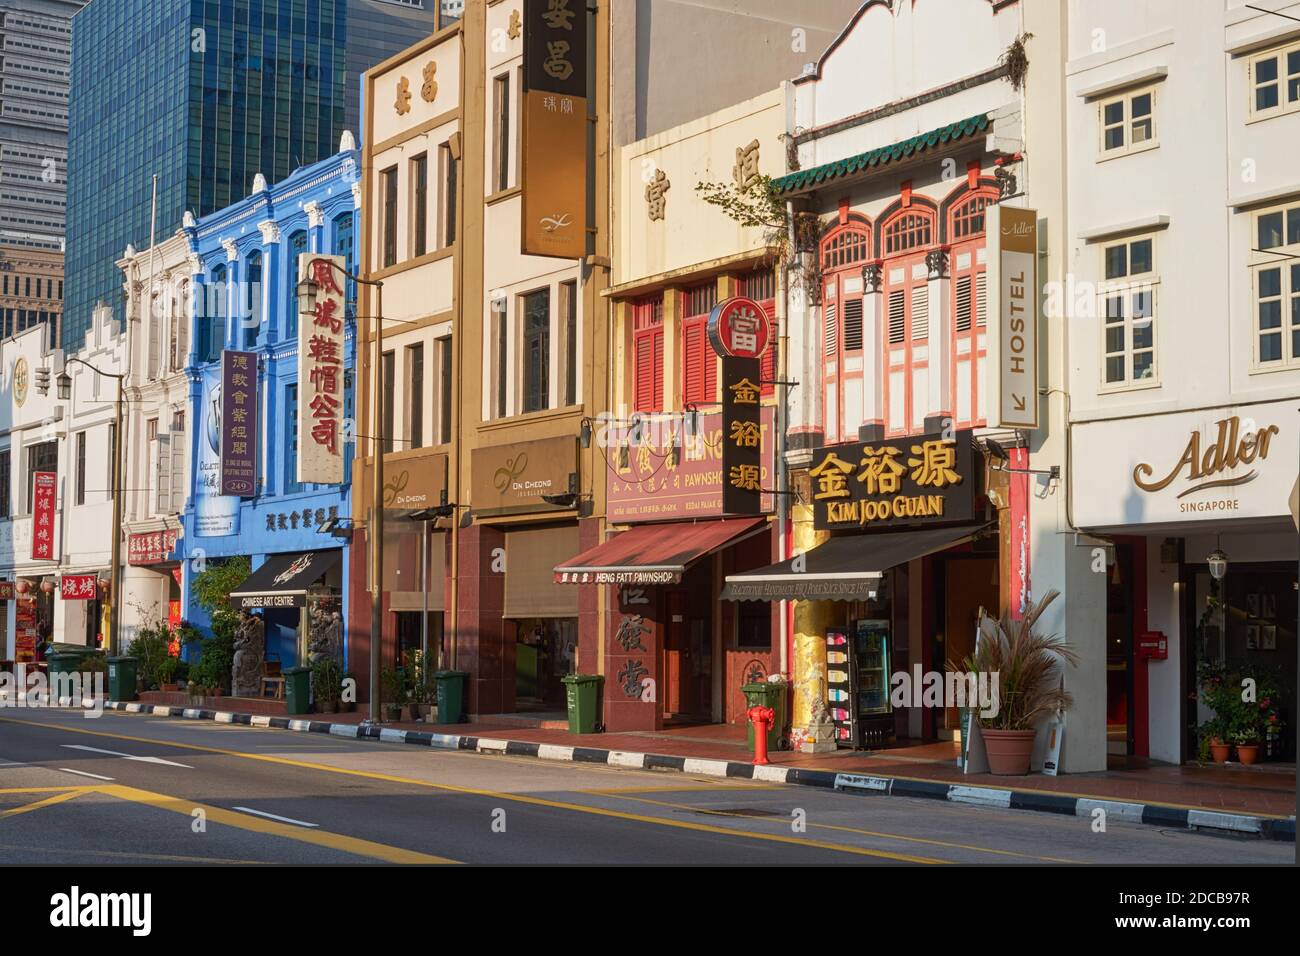 A row of colorful shophouses in South Bridge Road, Chinatown, Singapore Stock Photo